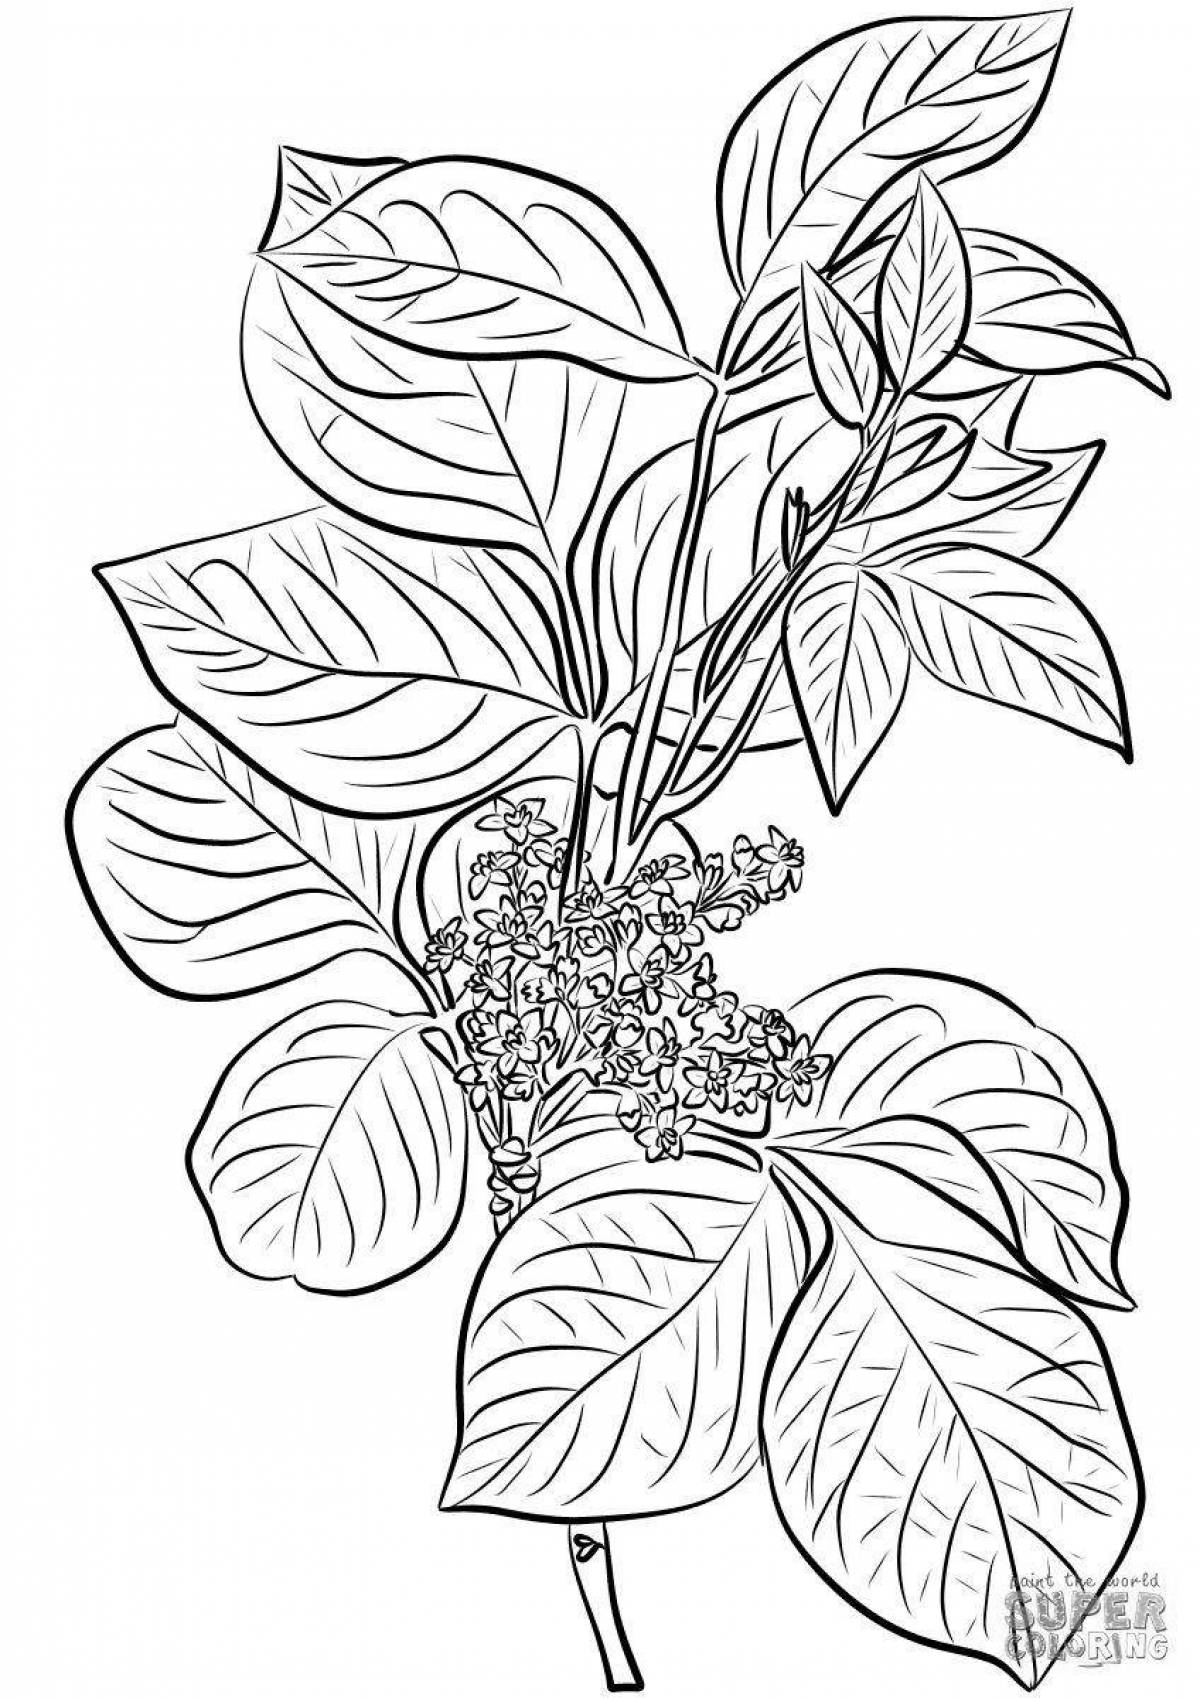 Fun coloring pages of poisonous plants for kids